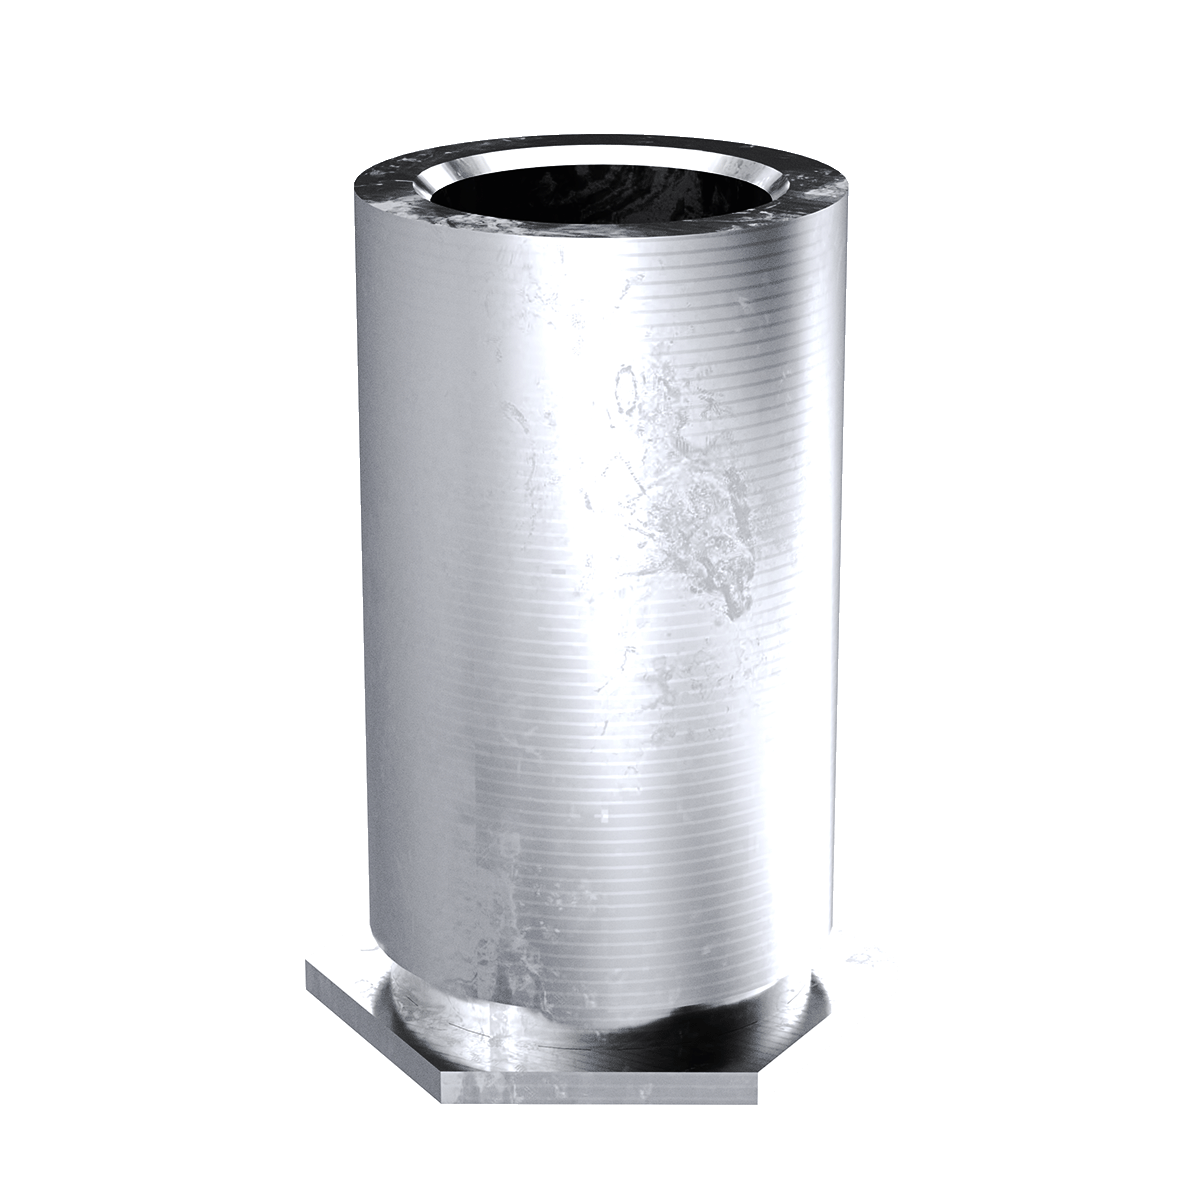 Self-Clinching Standoff, Through Unthreaded, 300 Series Stainless Steel, Passivated, 0.116 x 0.375, 100 Pack